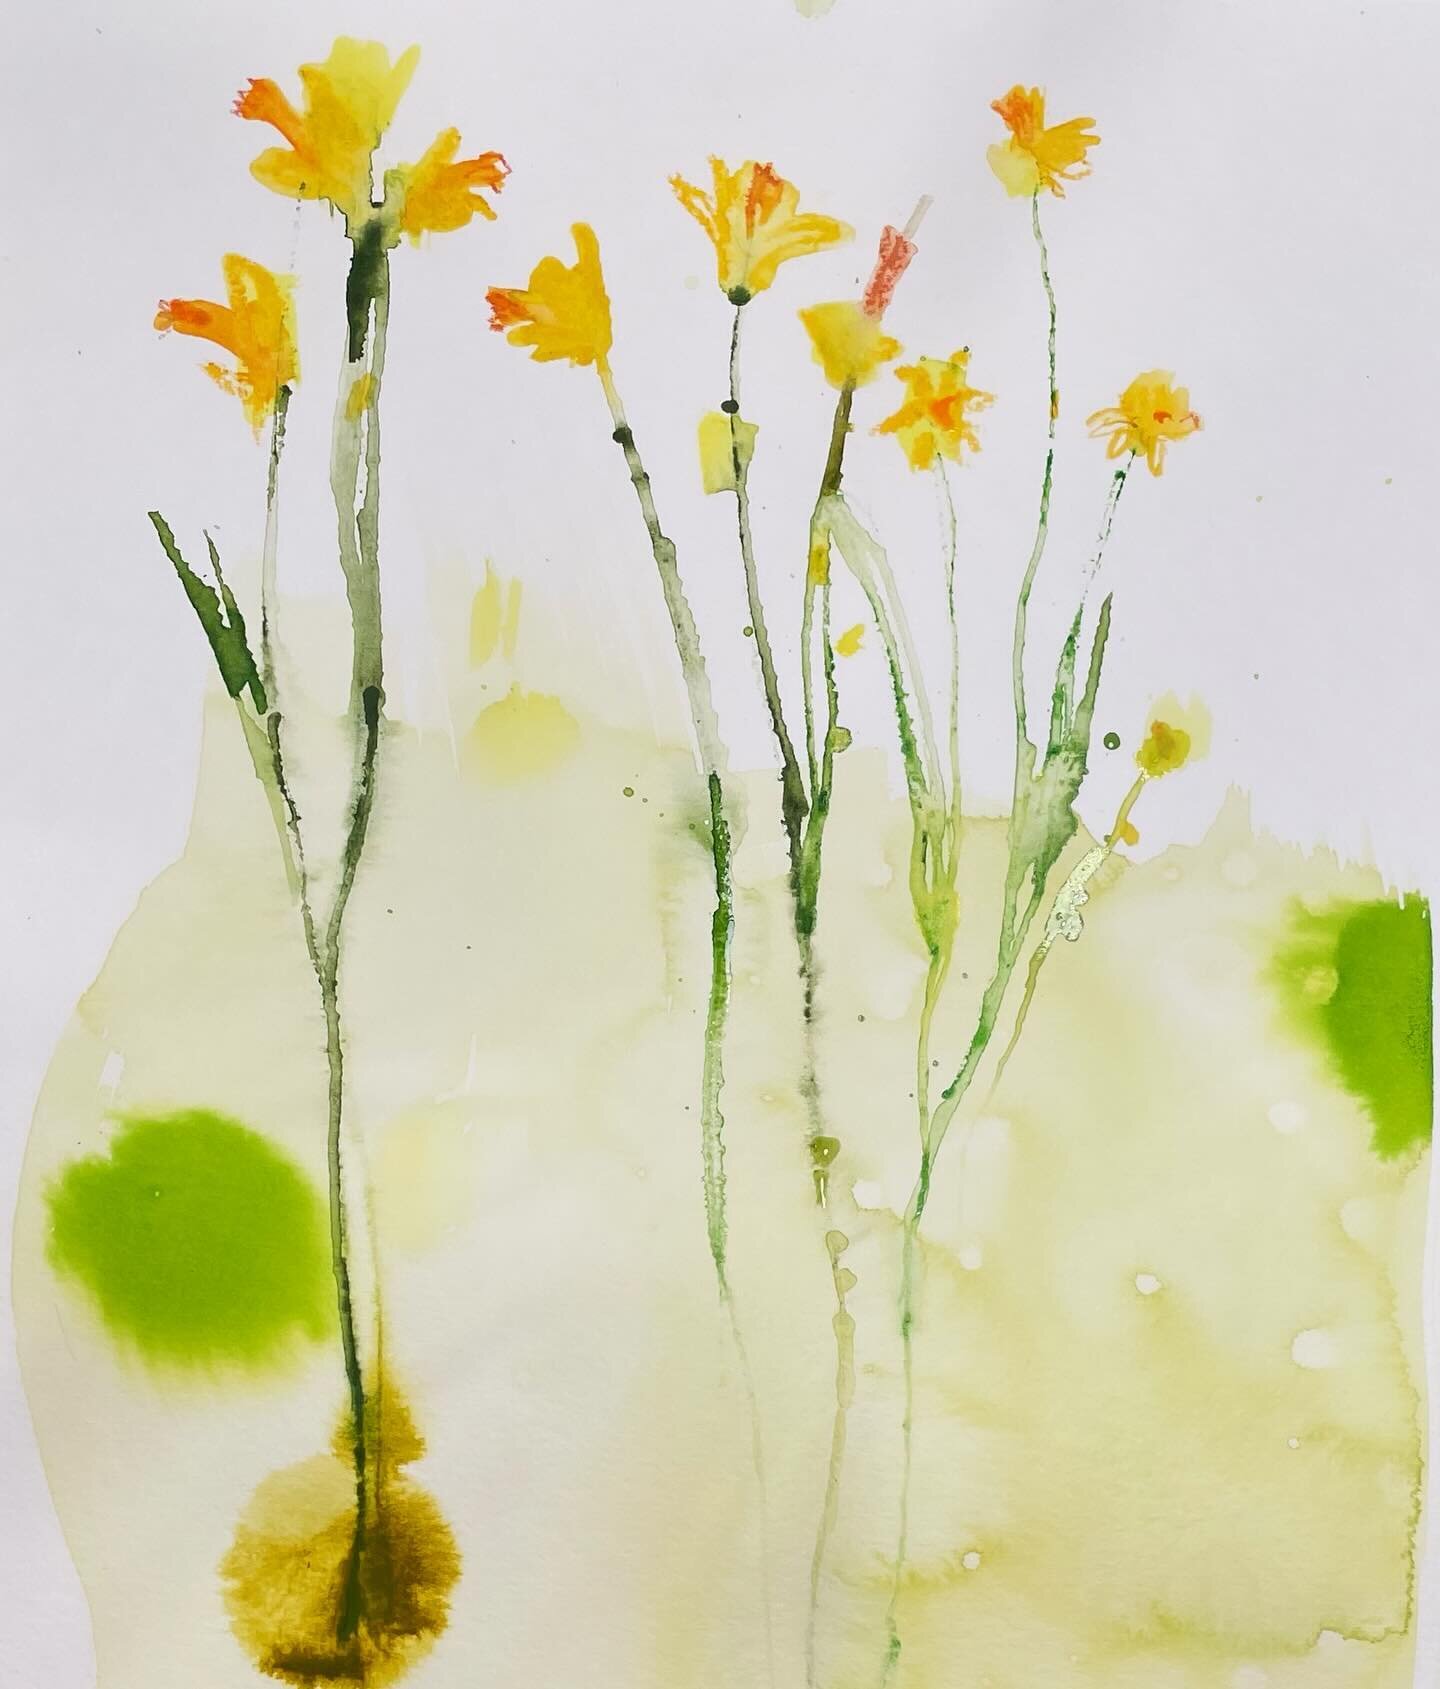 Today&rsquo;s post: Daffodils in bloom. It seems everywhere I turn there are daffodils! Such an inspiration of yellow. 
#daffodils #yellow #yellowflowers #florals #simpleflowers #simpleflorals #daffodilseason #iloveflowers #flowerlovers #botanicalart